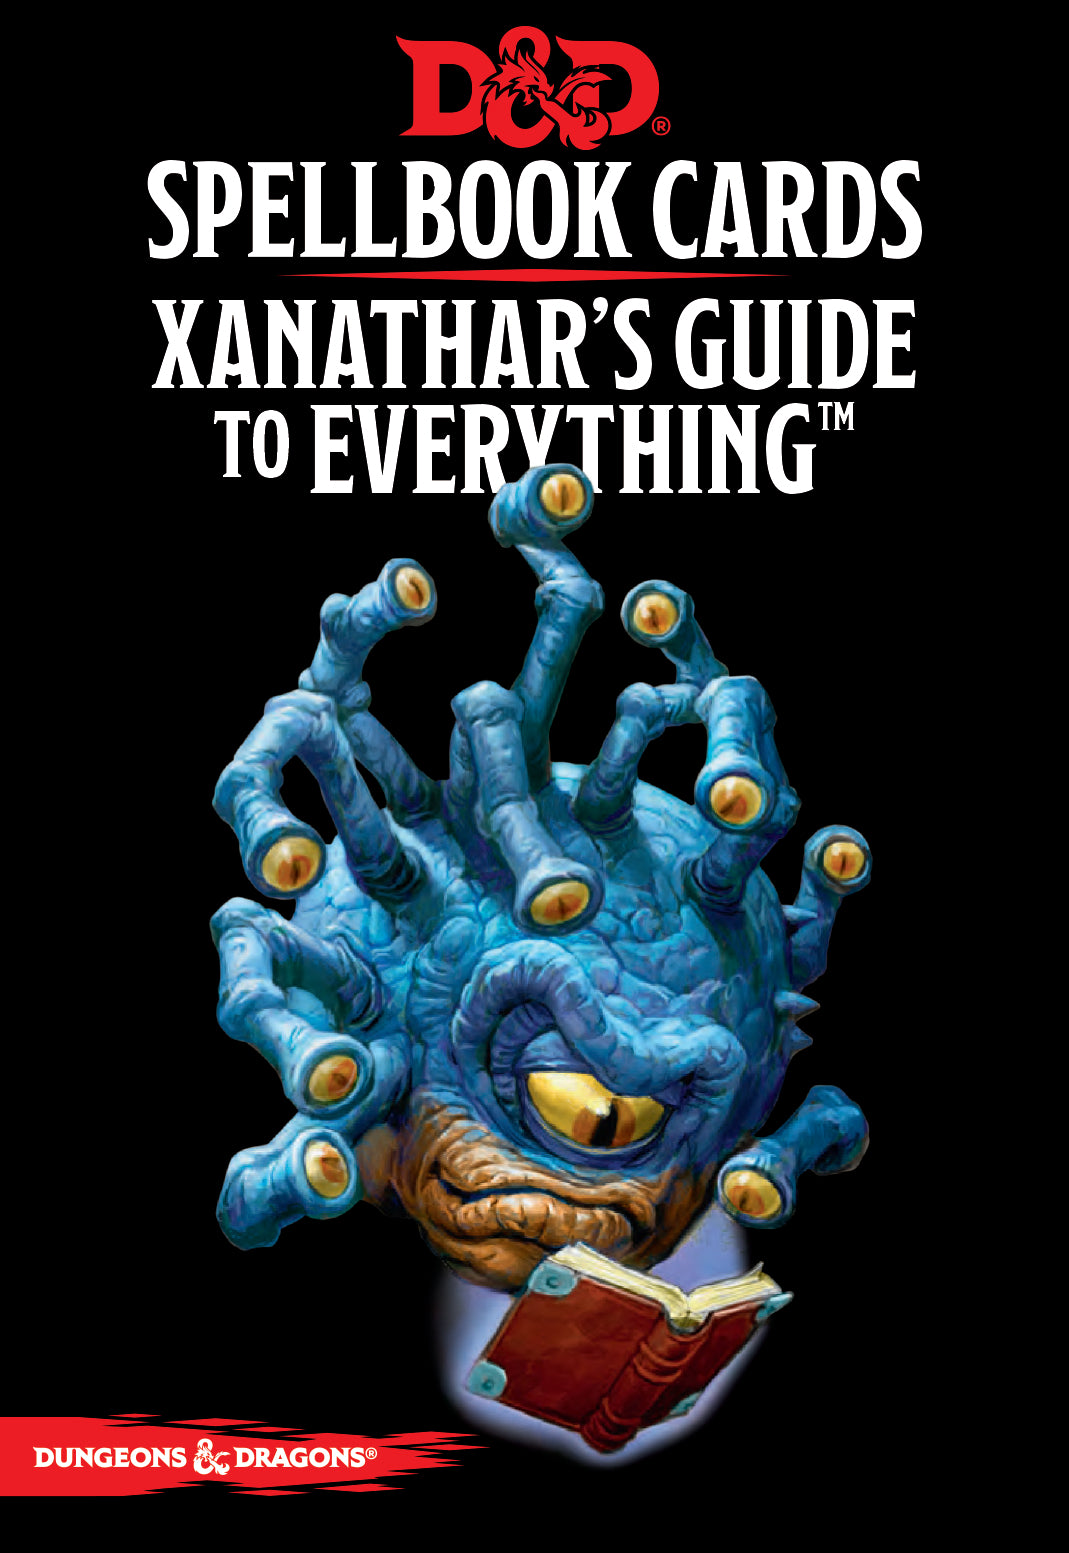 D&D Xanathar's Guide to Everything Spellbook Cards